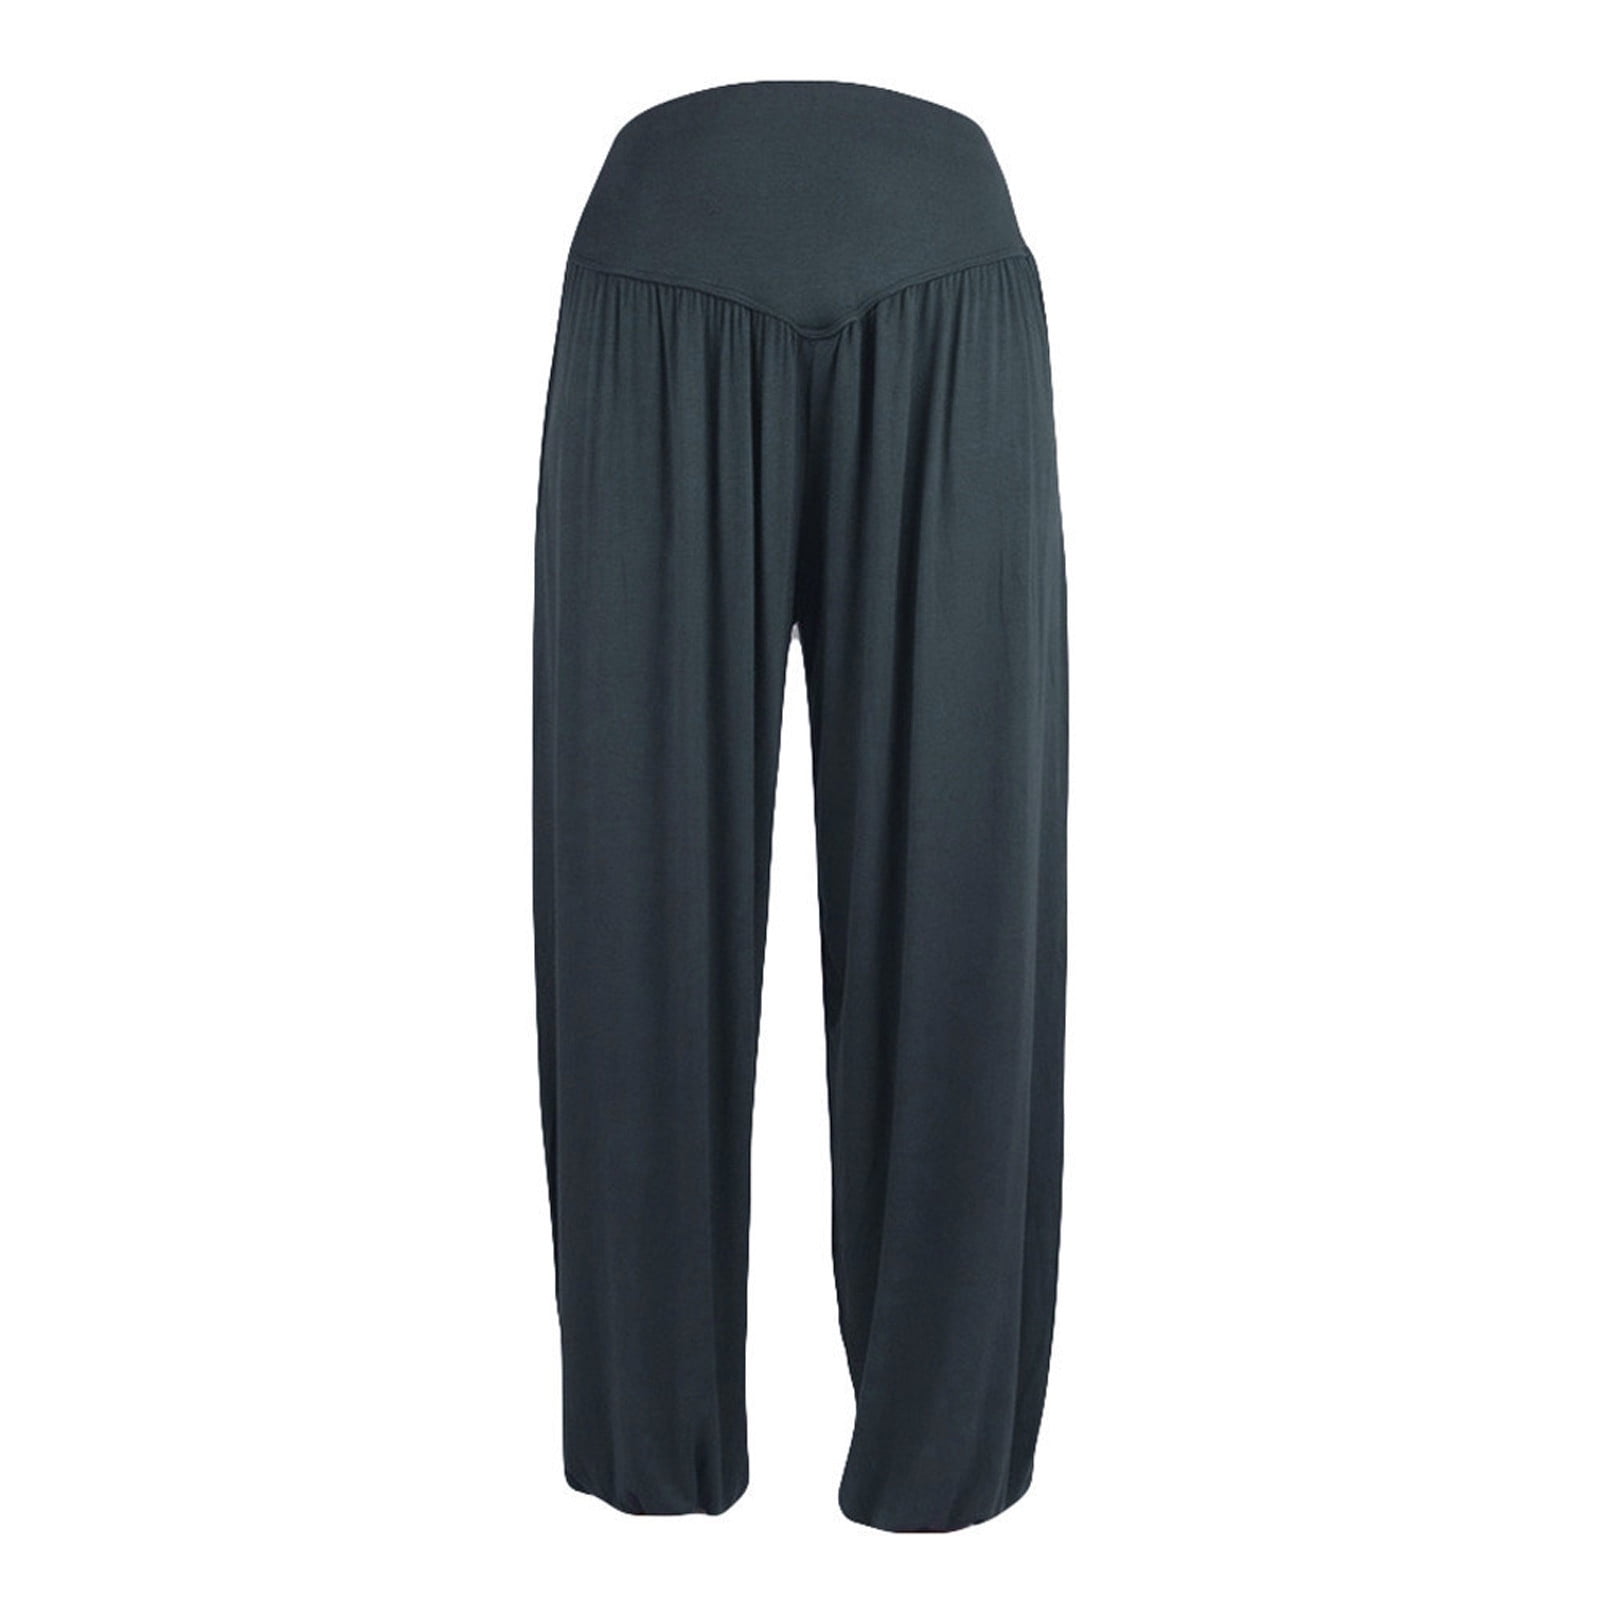 BDG Washed Black Balloon Pants - Grey 32W 32L at Urban Outfitters | £59.00  | Mirror Online